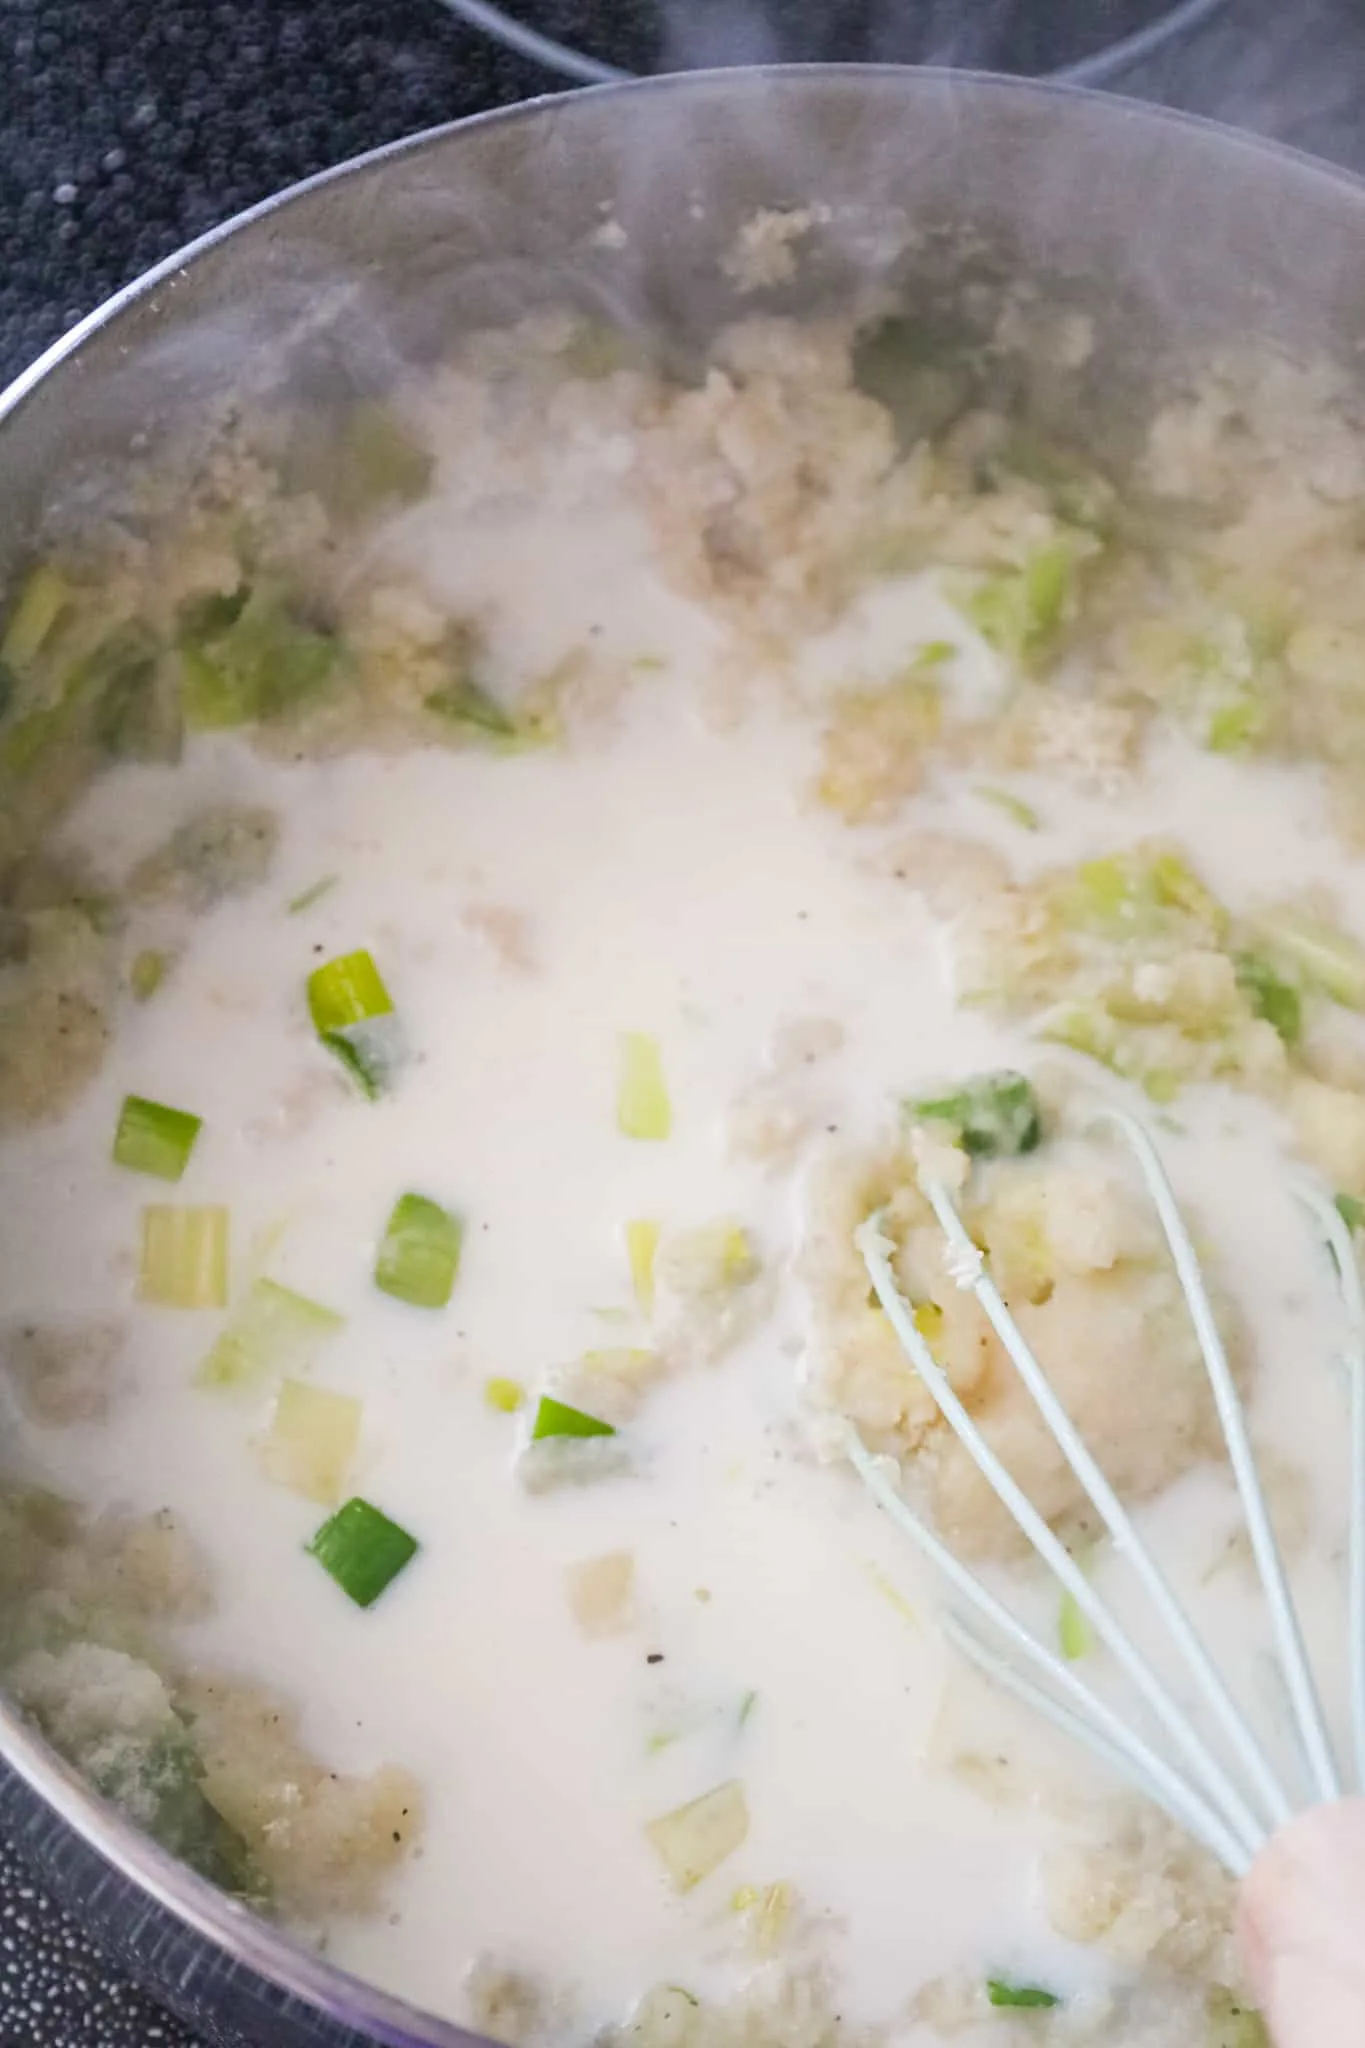 milk added to mashed potato and leek mixture